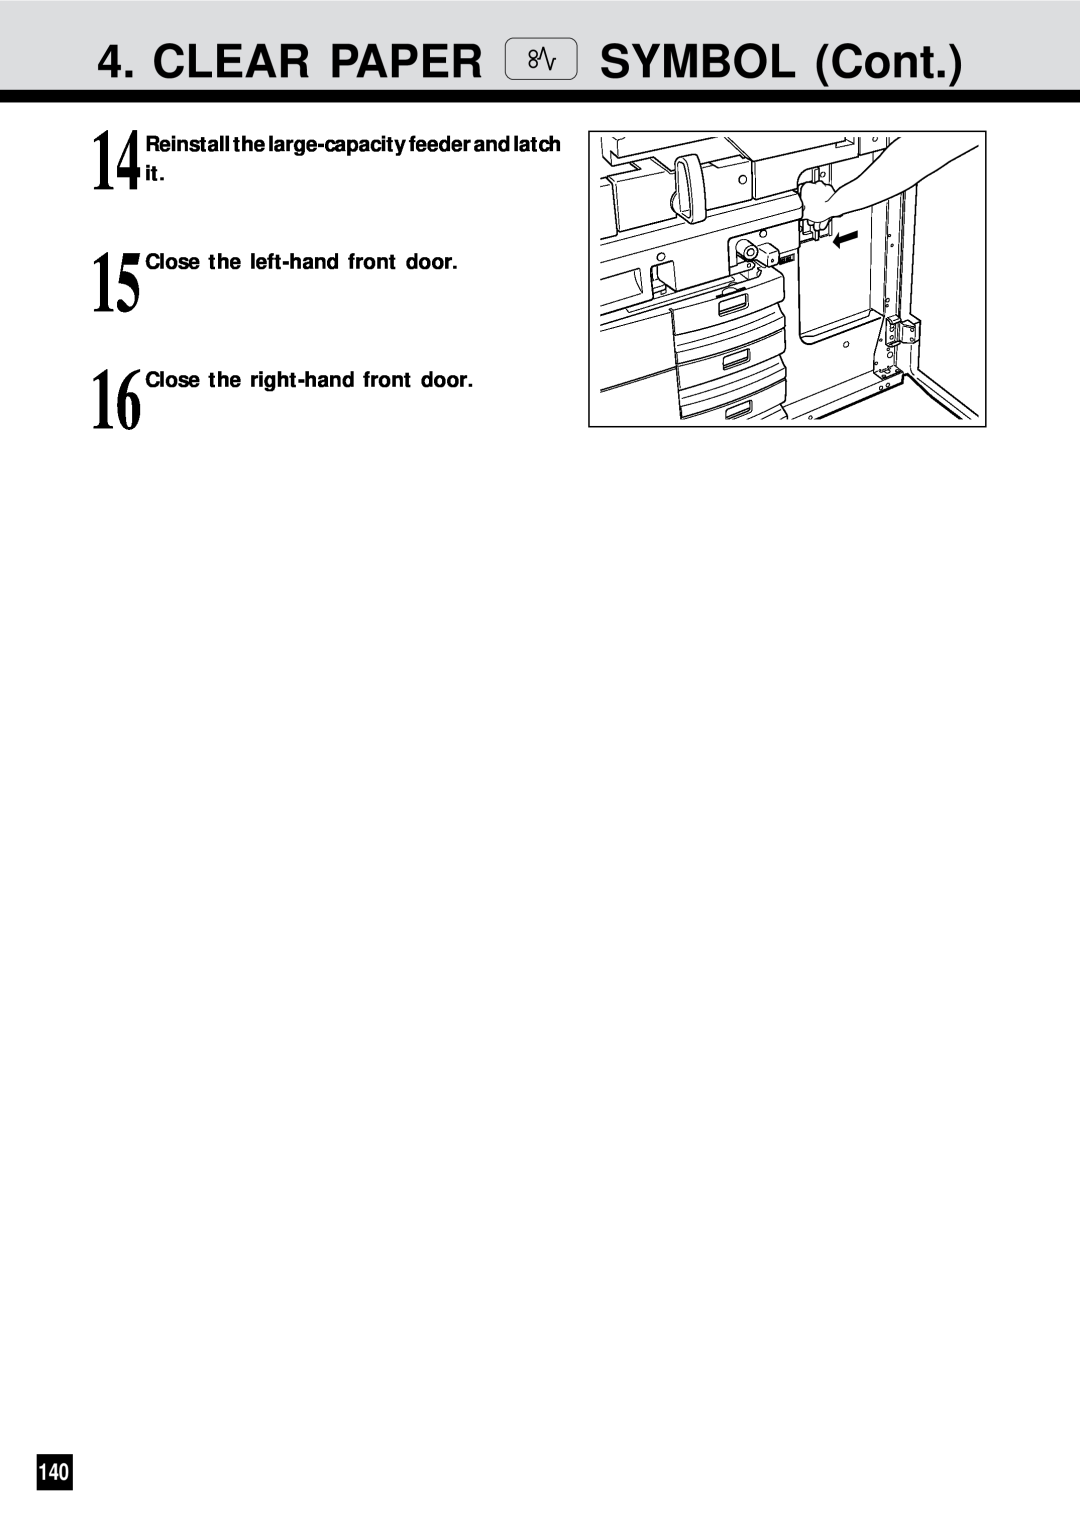 Sharp AR-650 operation manual 14Reinstall the large-capacity feeder and latch it, CLEAR PAPER SYMBOL Cont 